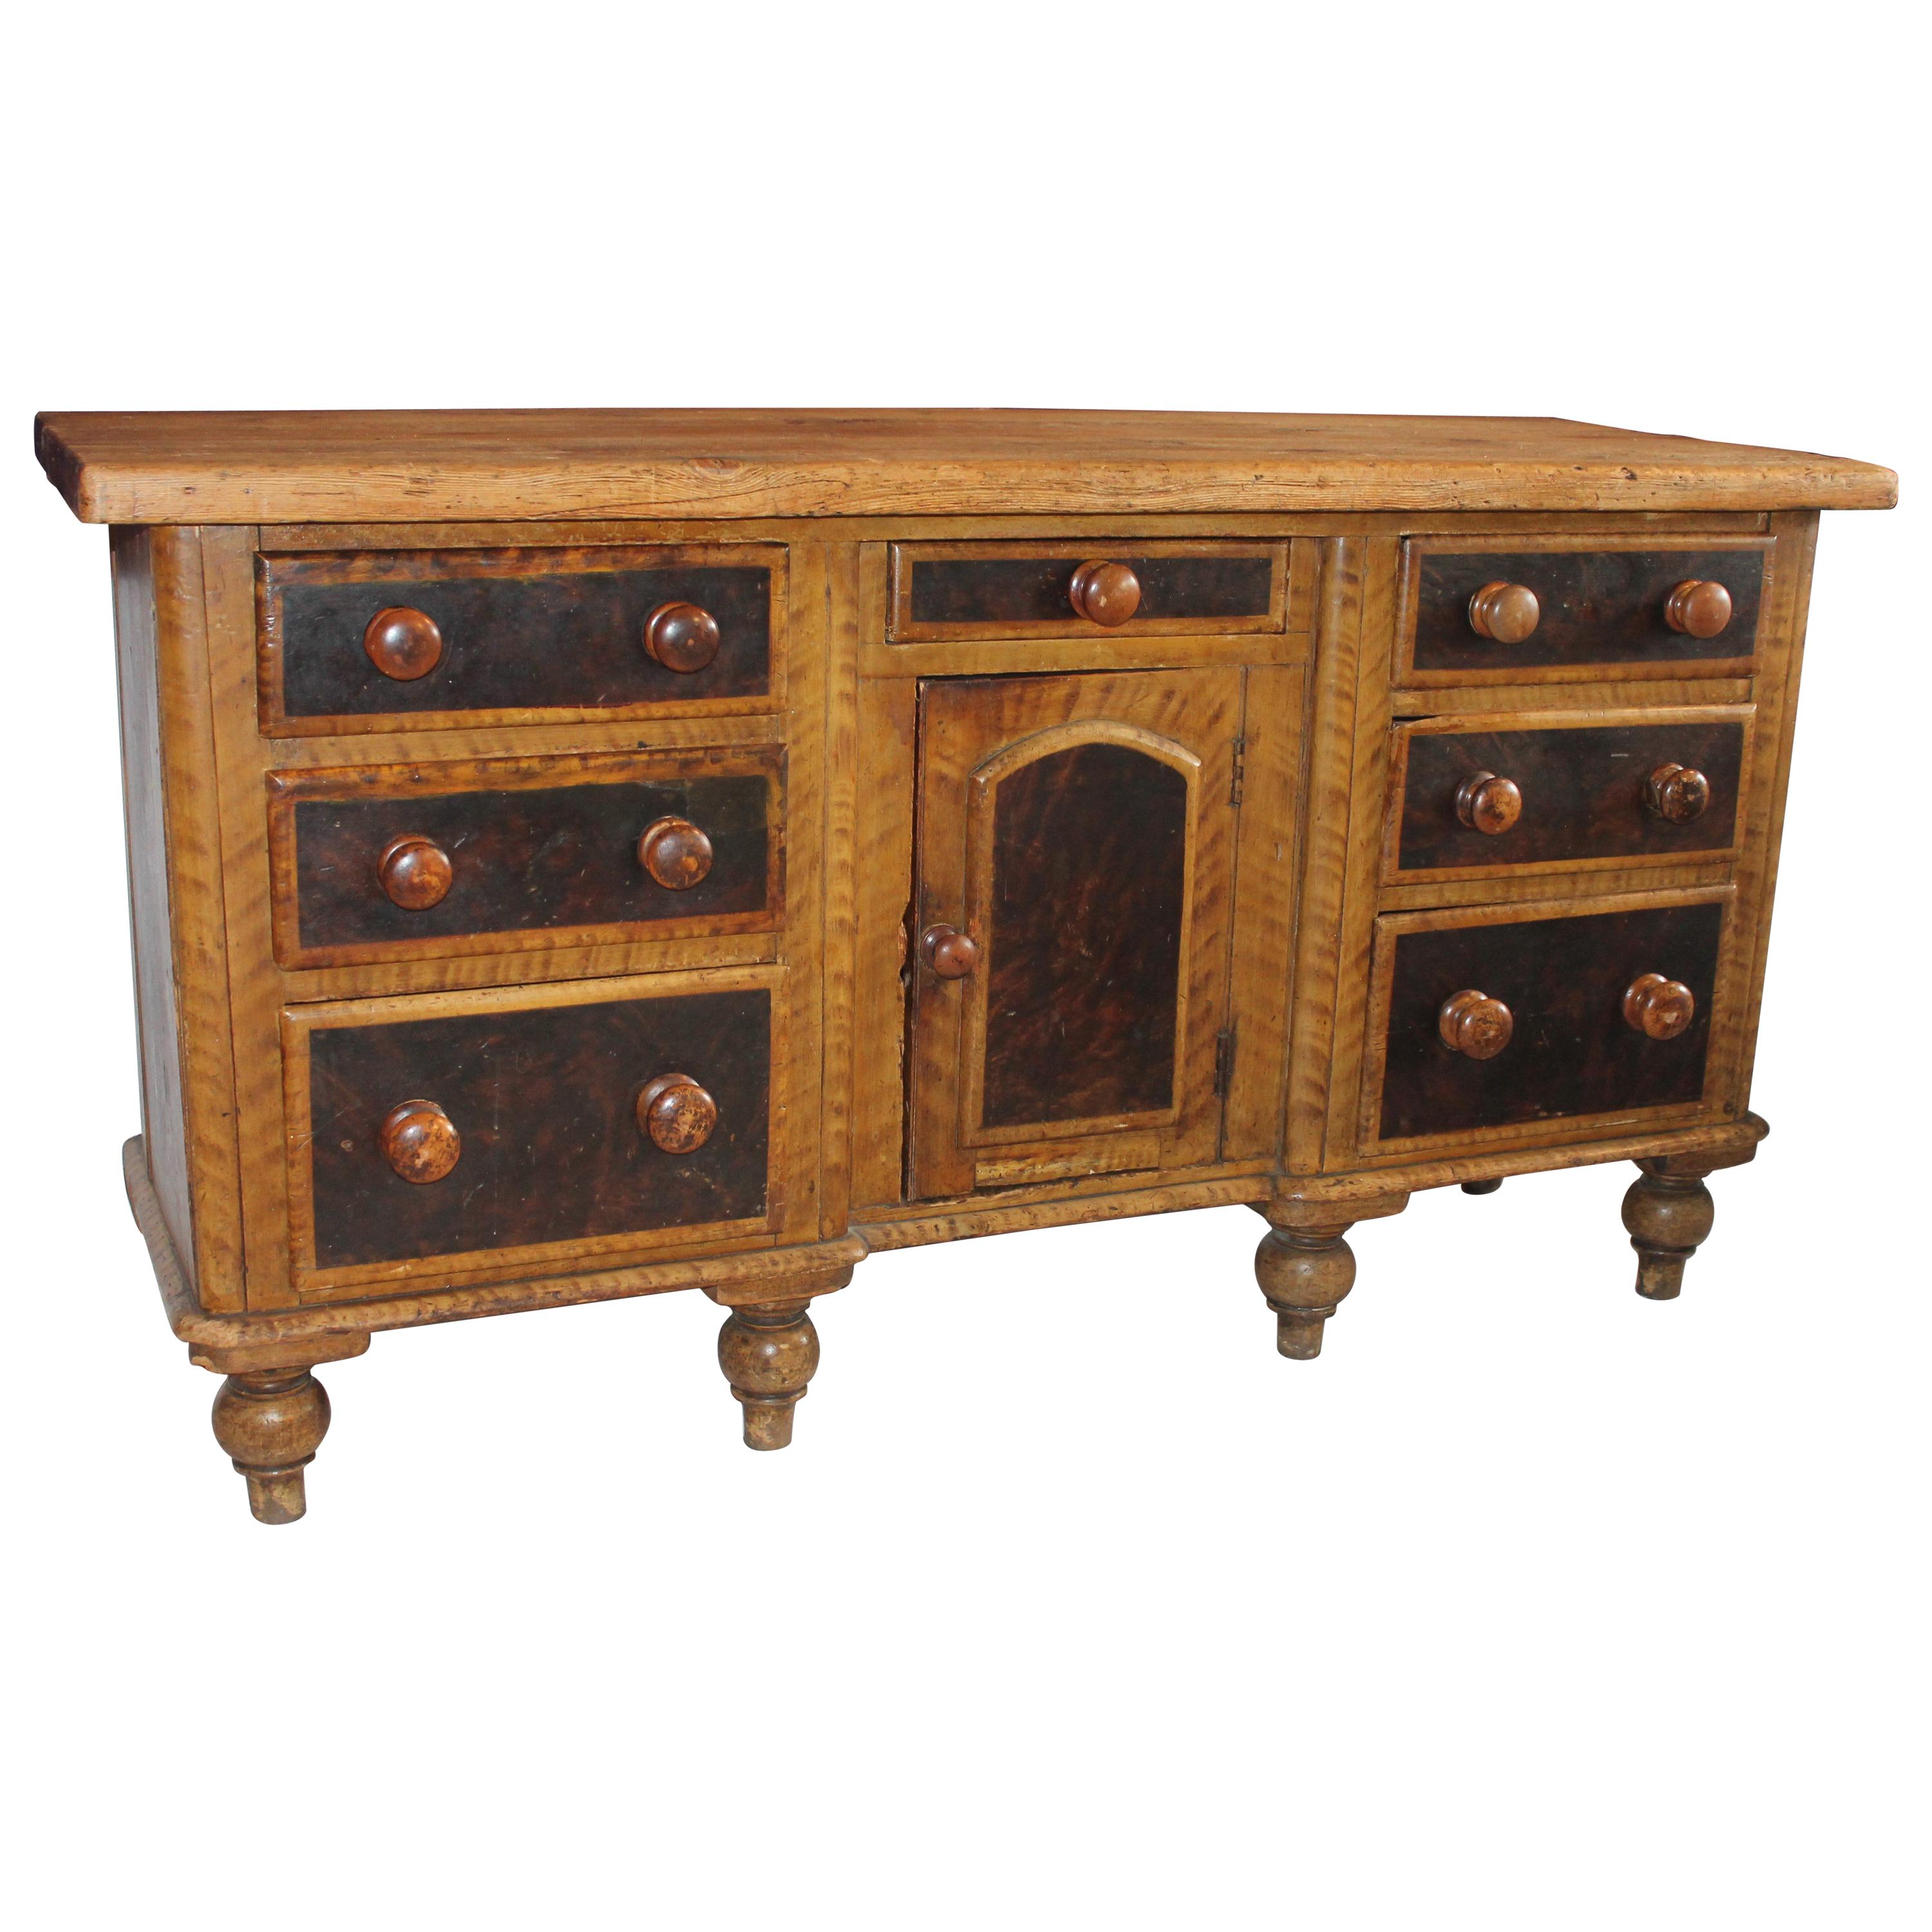 19th C. Original Painted  Multi Drawer Credenza / Apothecary